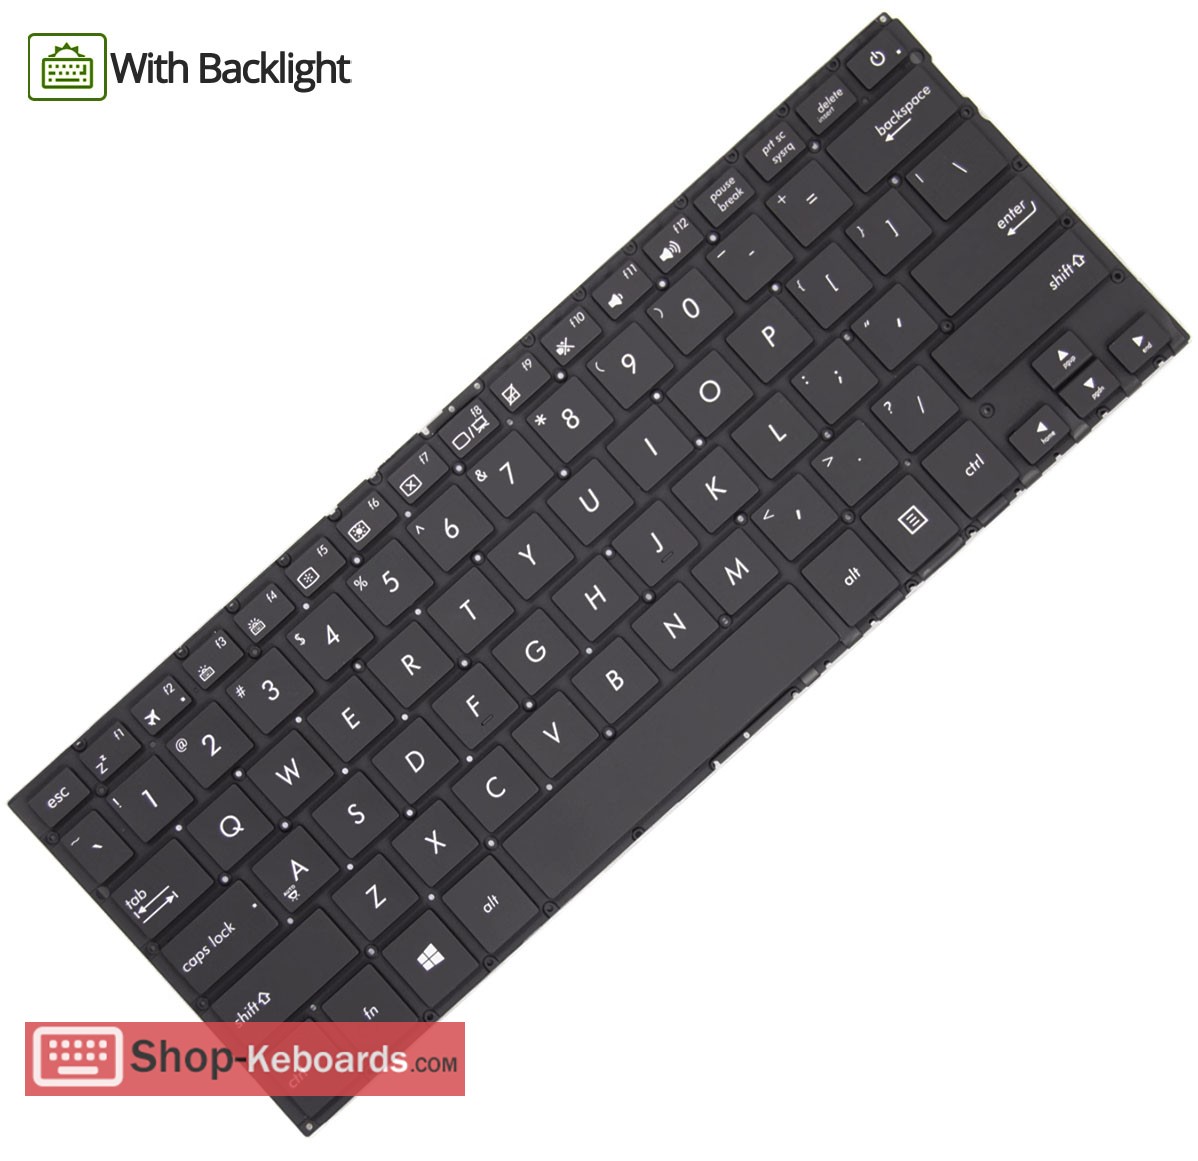 Asus 0KNB0-212CUS00 Keyboard replacement